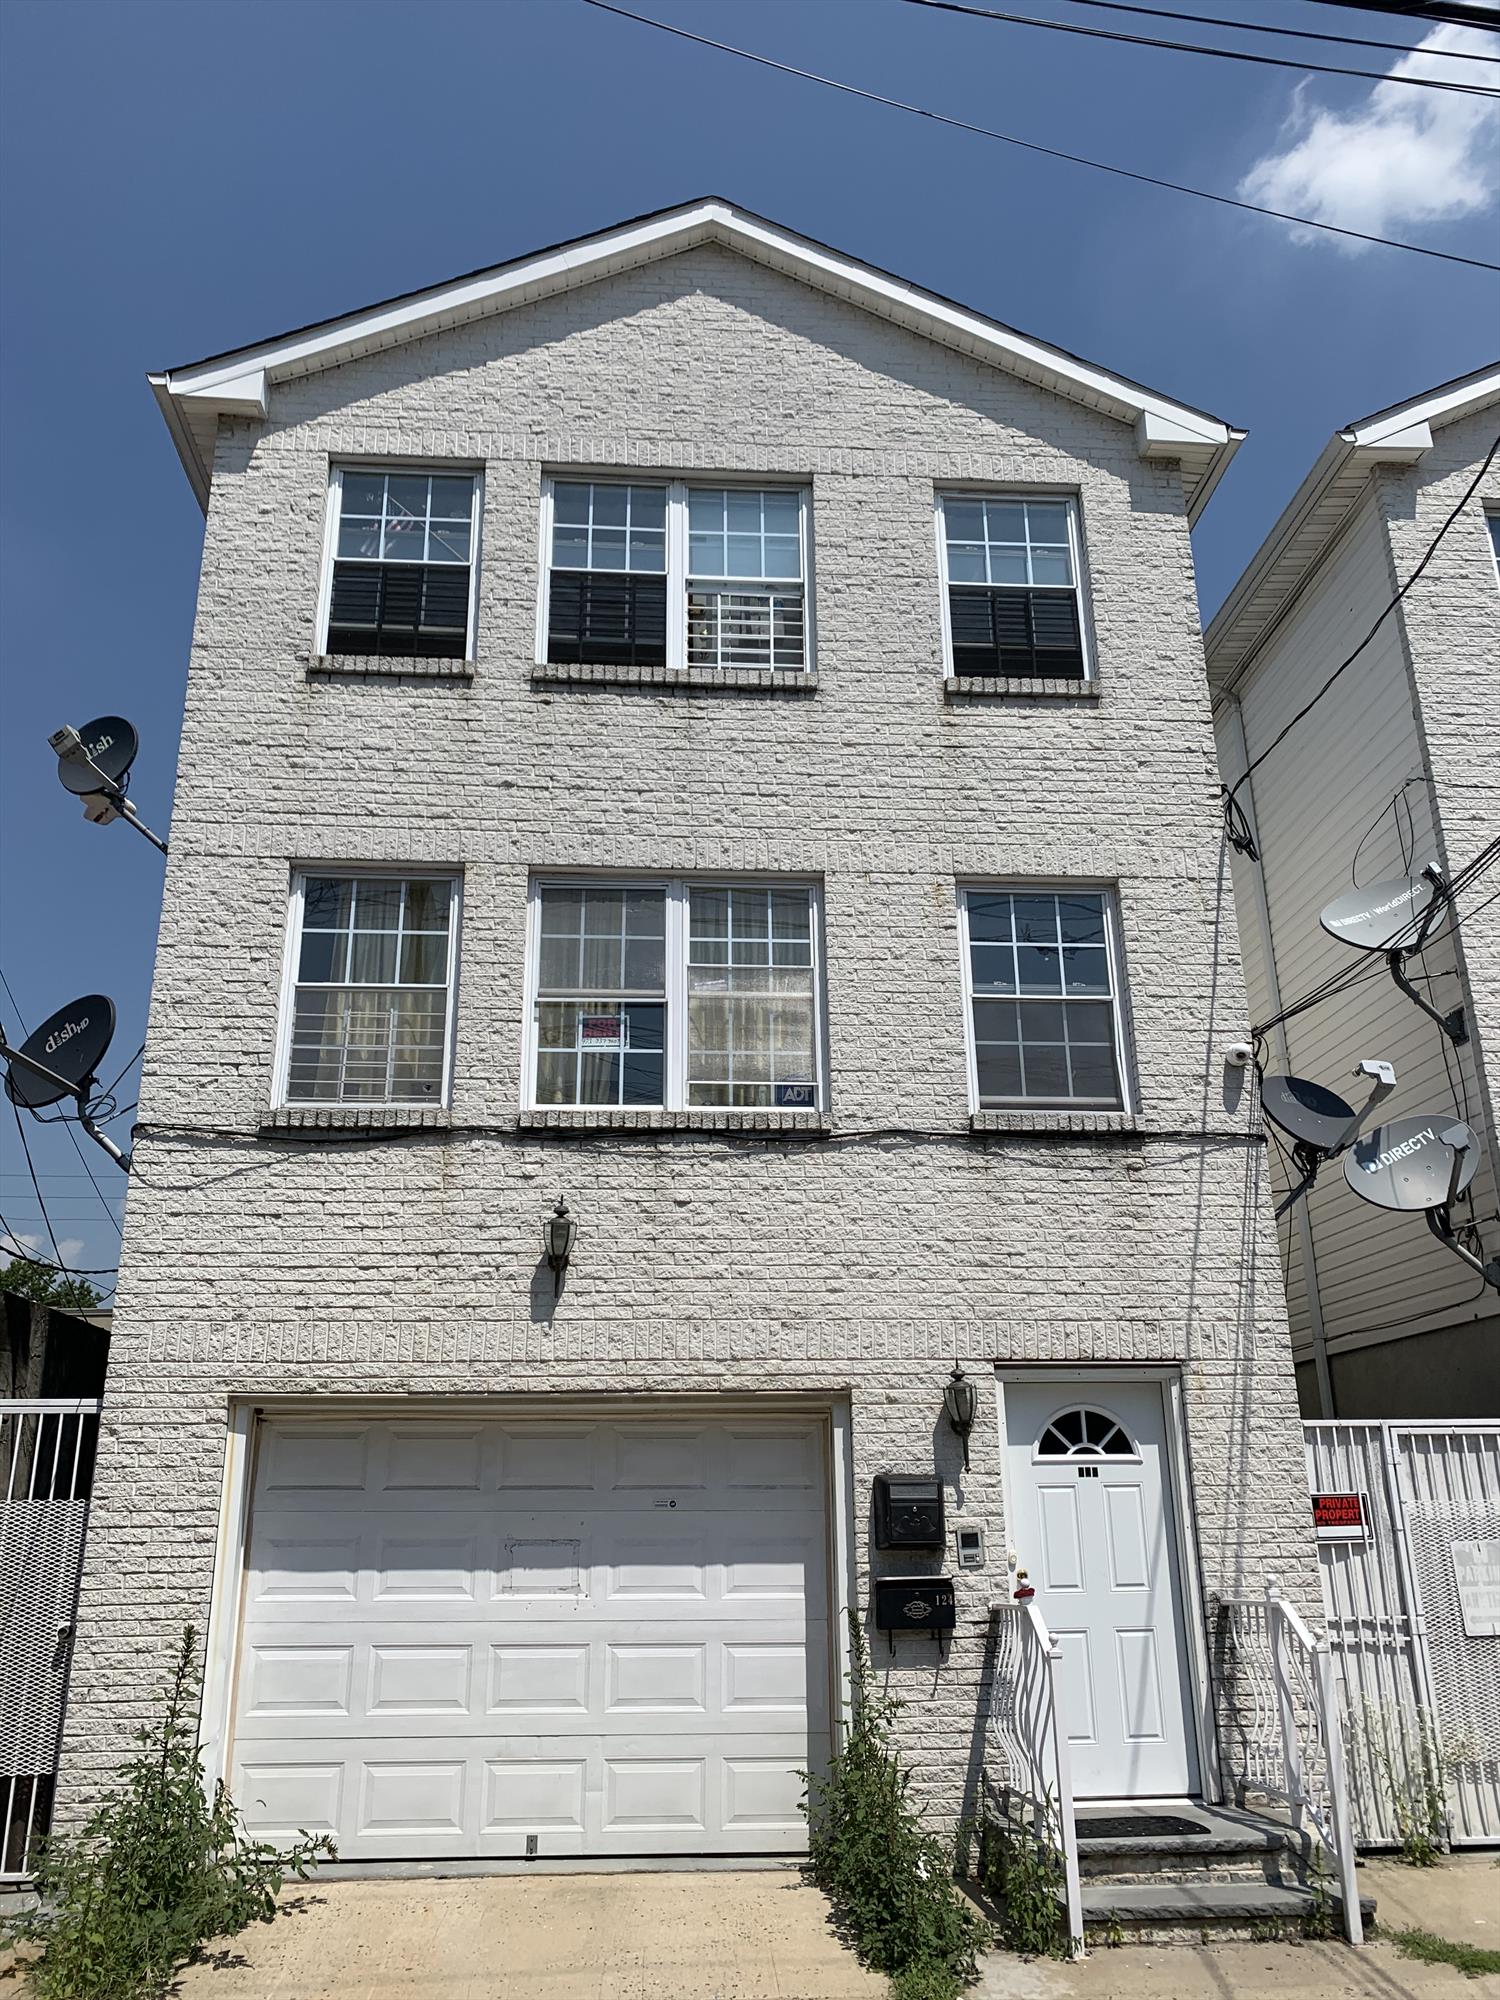 You must see this large three bed two bath apartment! Apartment has just been completely painted.
Great natural light!

Hardwood floors throughout. Central air and heat! Great natural light.

Available for: Vacant(Owner flexible on move-in date)